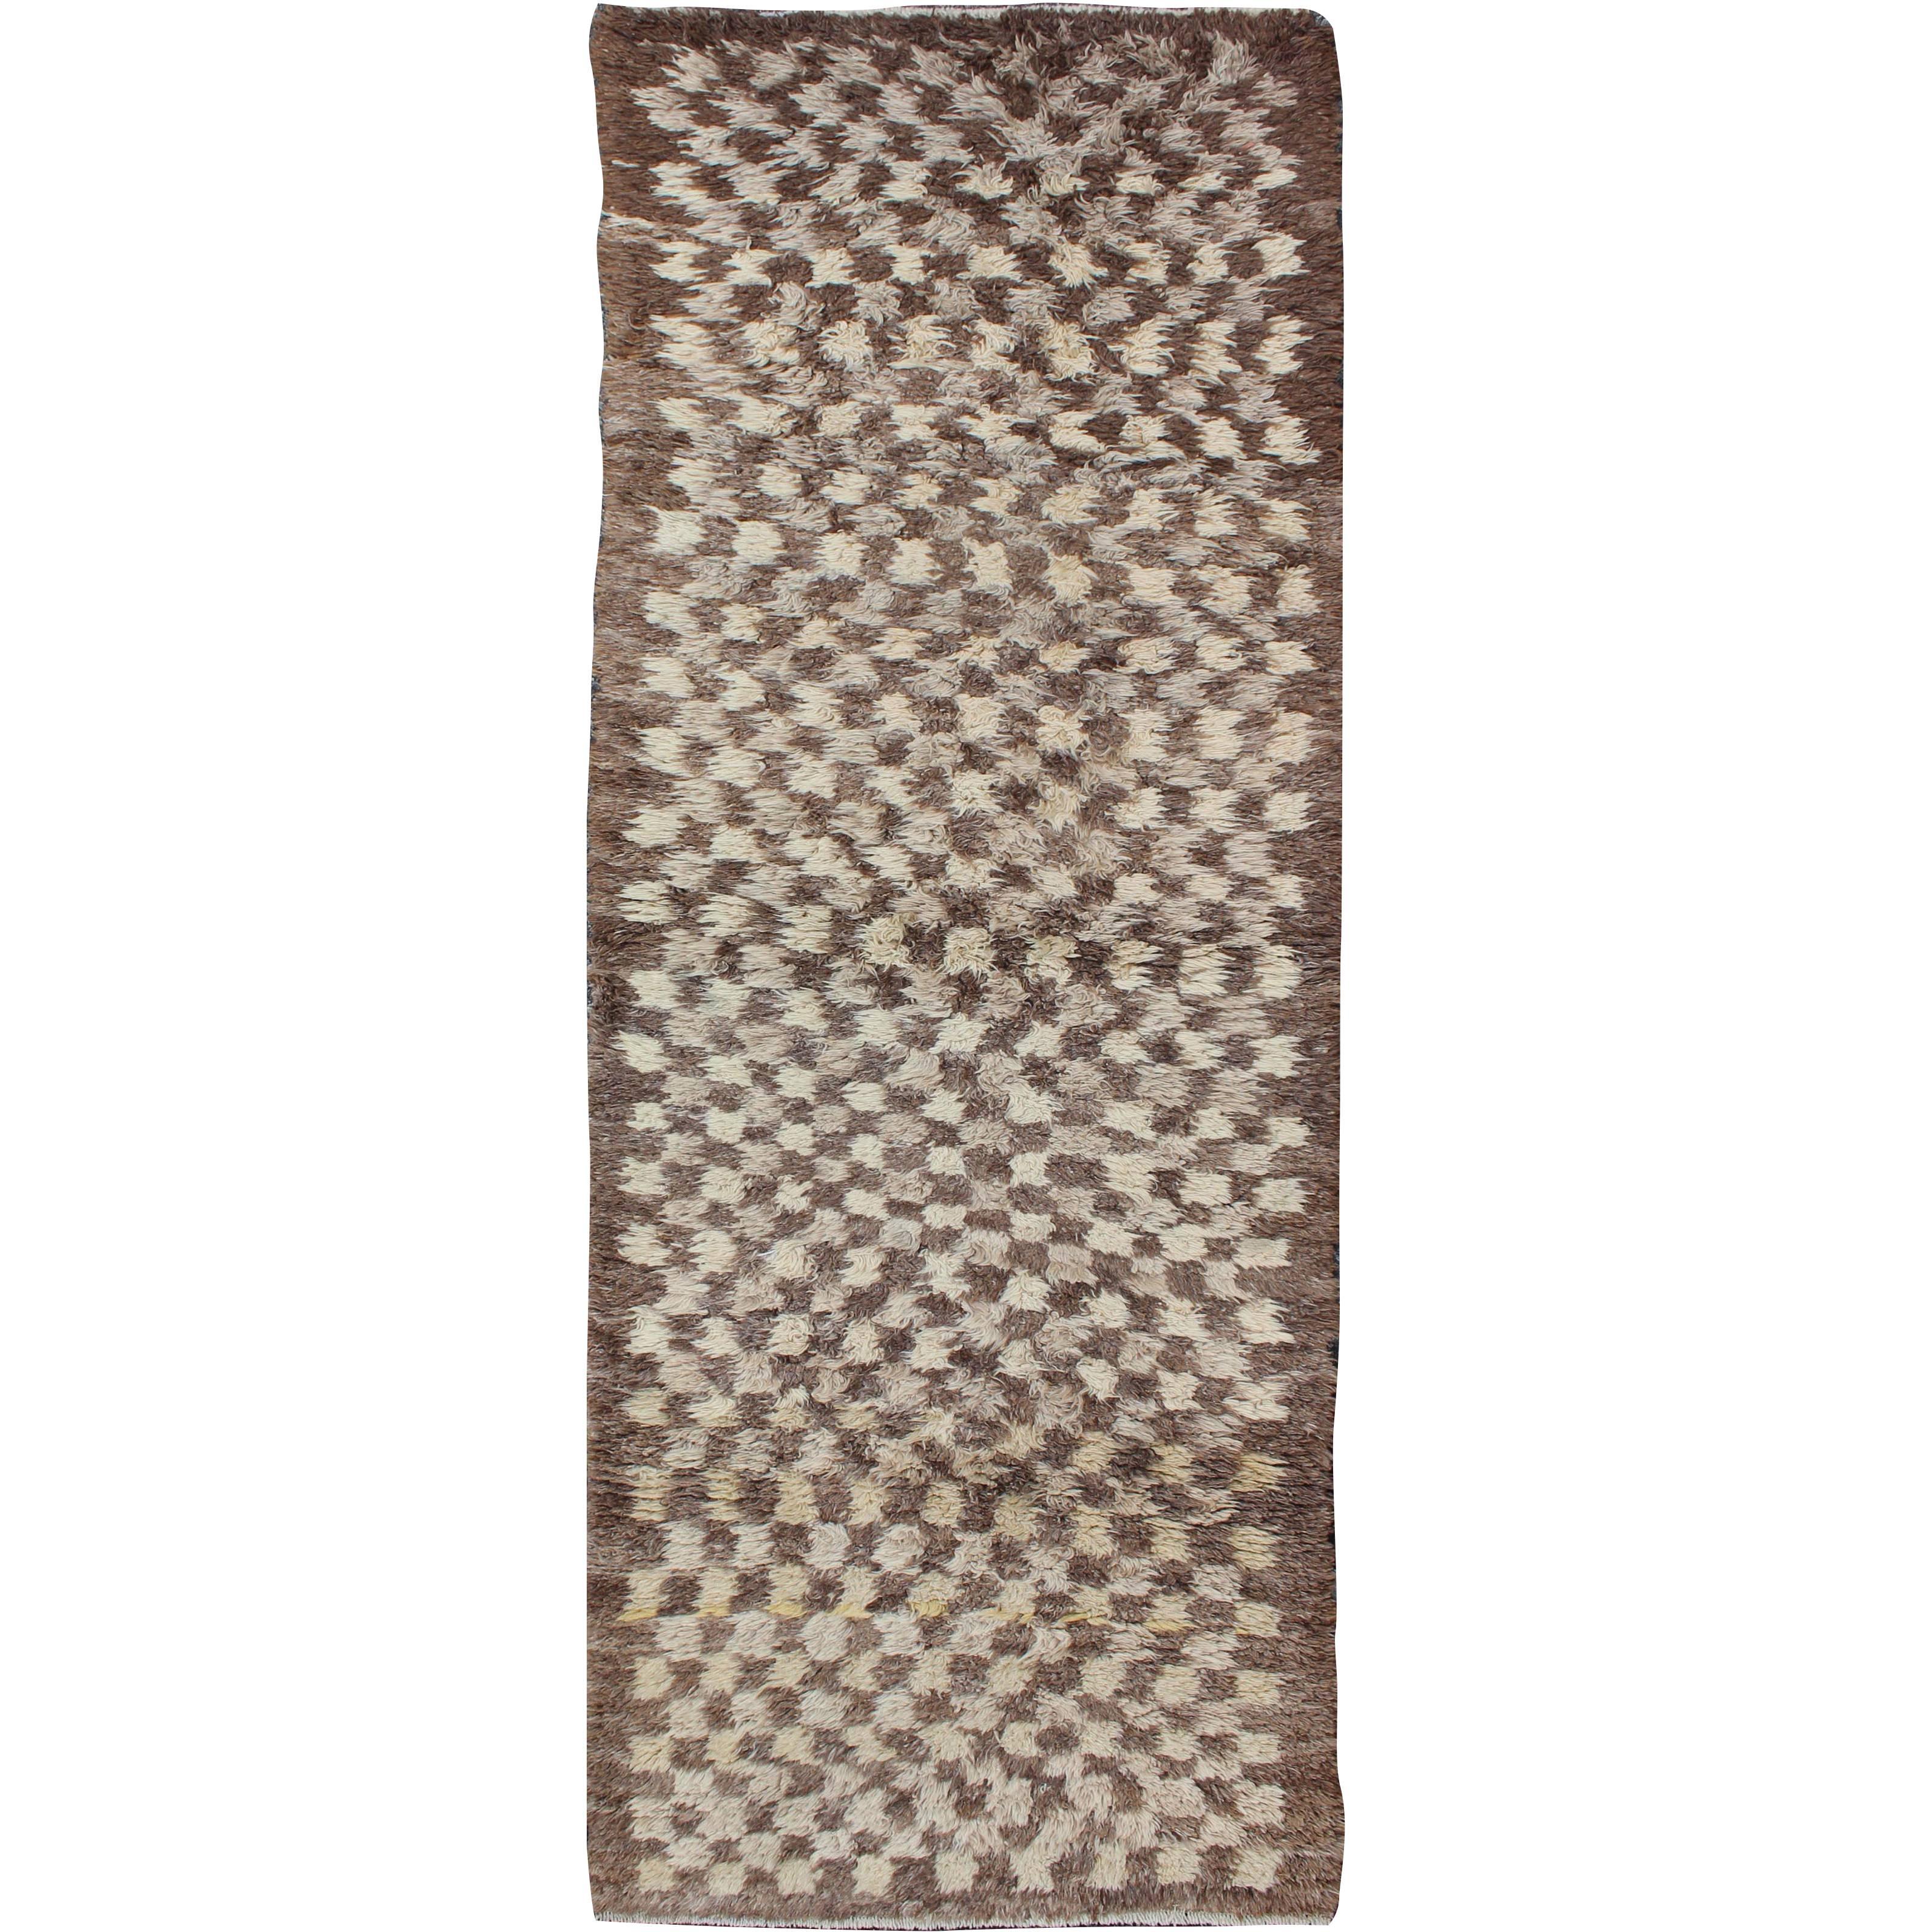  Vintage Turkish Tulu Rug with Shaggy Pile & Checkerboard Pattern